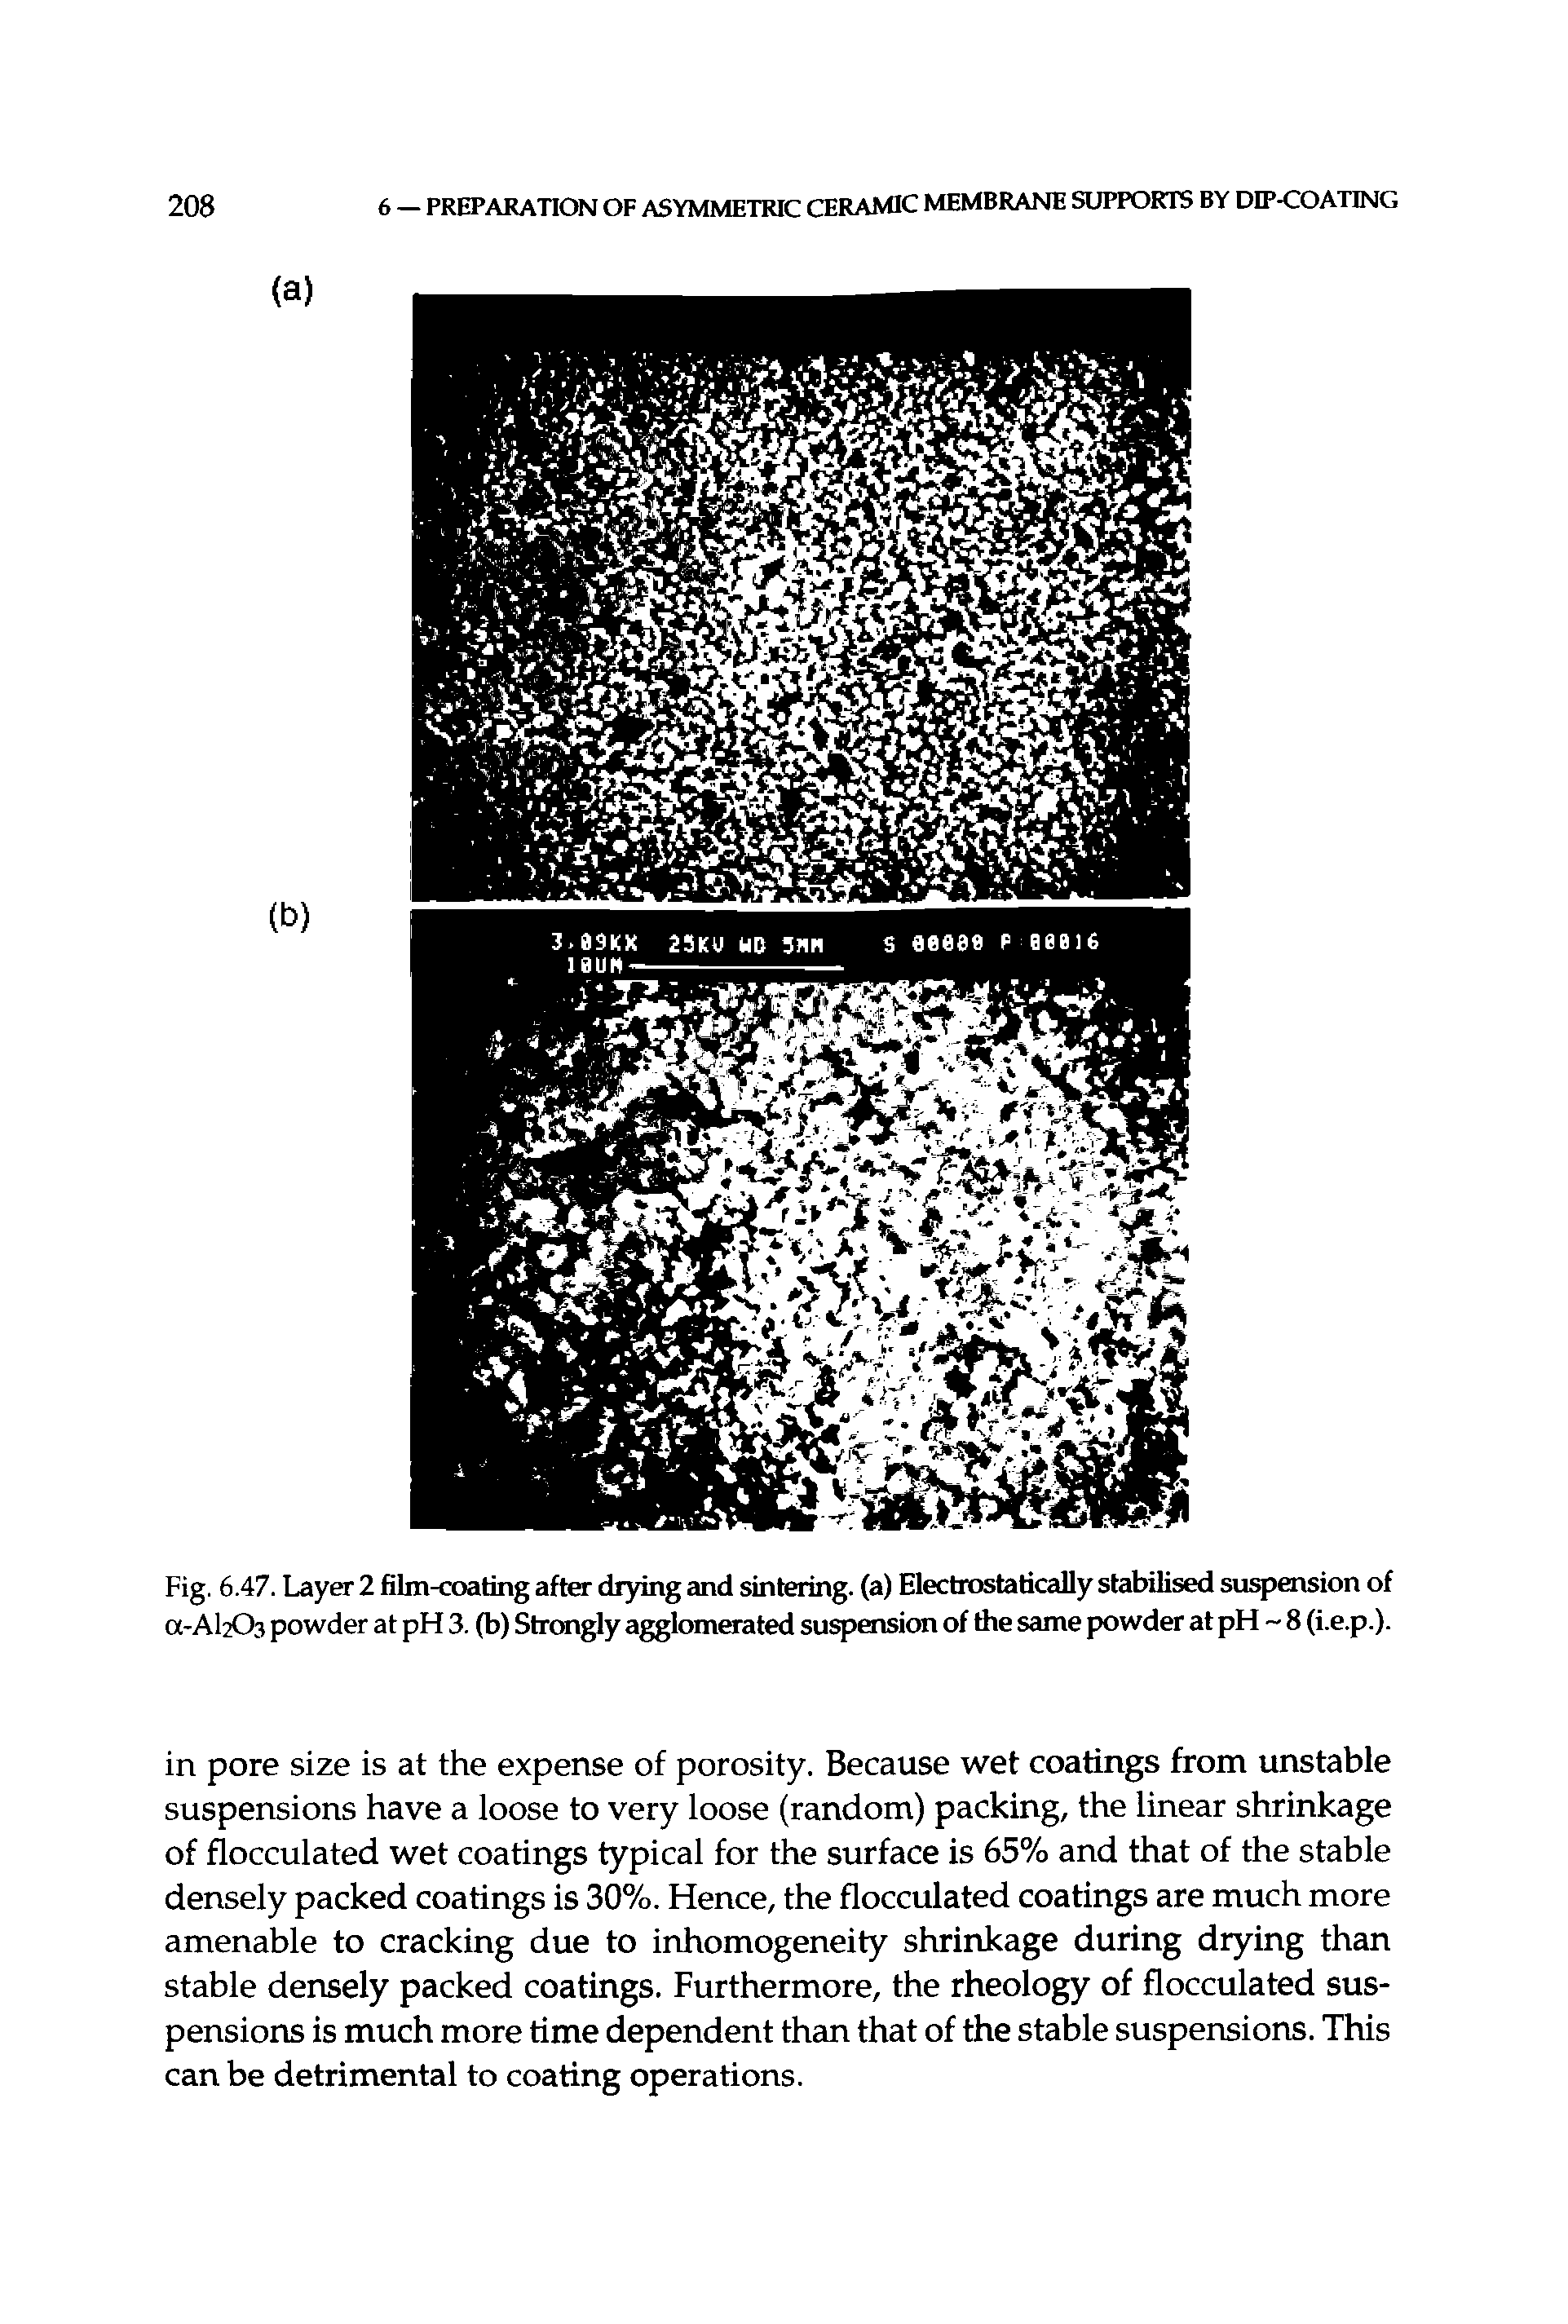 Fig. 6.47. Layer 2 film-coating after dr5fing cmd sintering, (a) Electrostatically stabilised suspension of a-Al203 powder at pH 3. (b) Strongly agglomerated suspension of the same powder at pH 8 (i.e.p.).